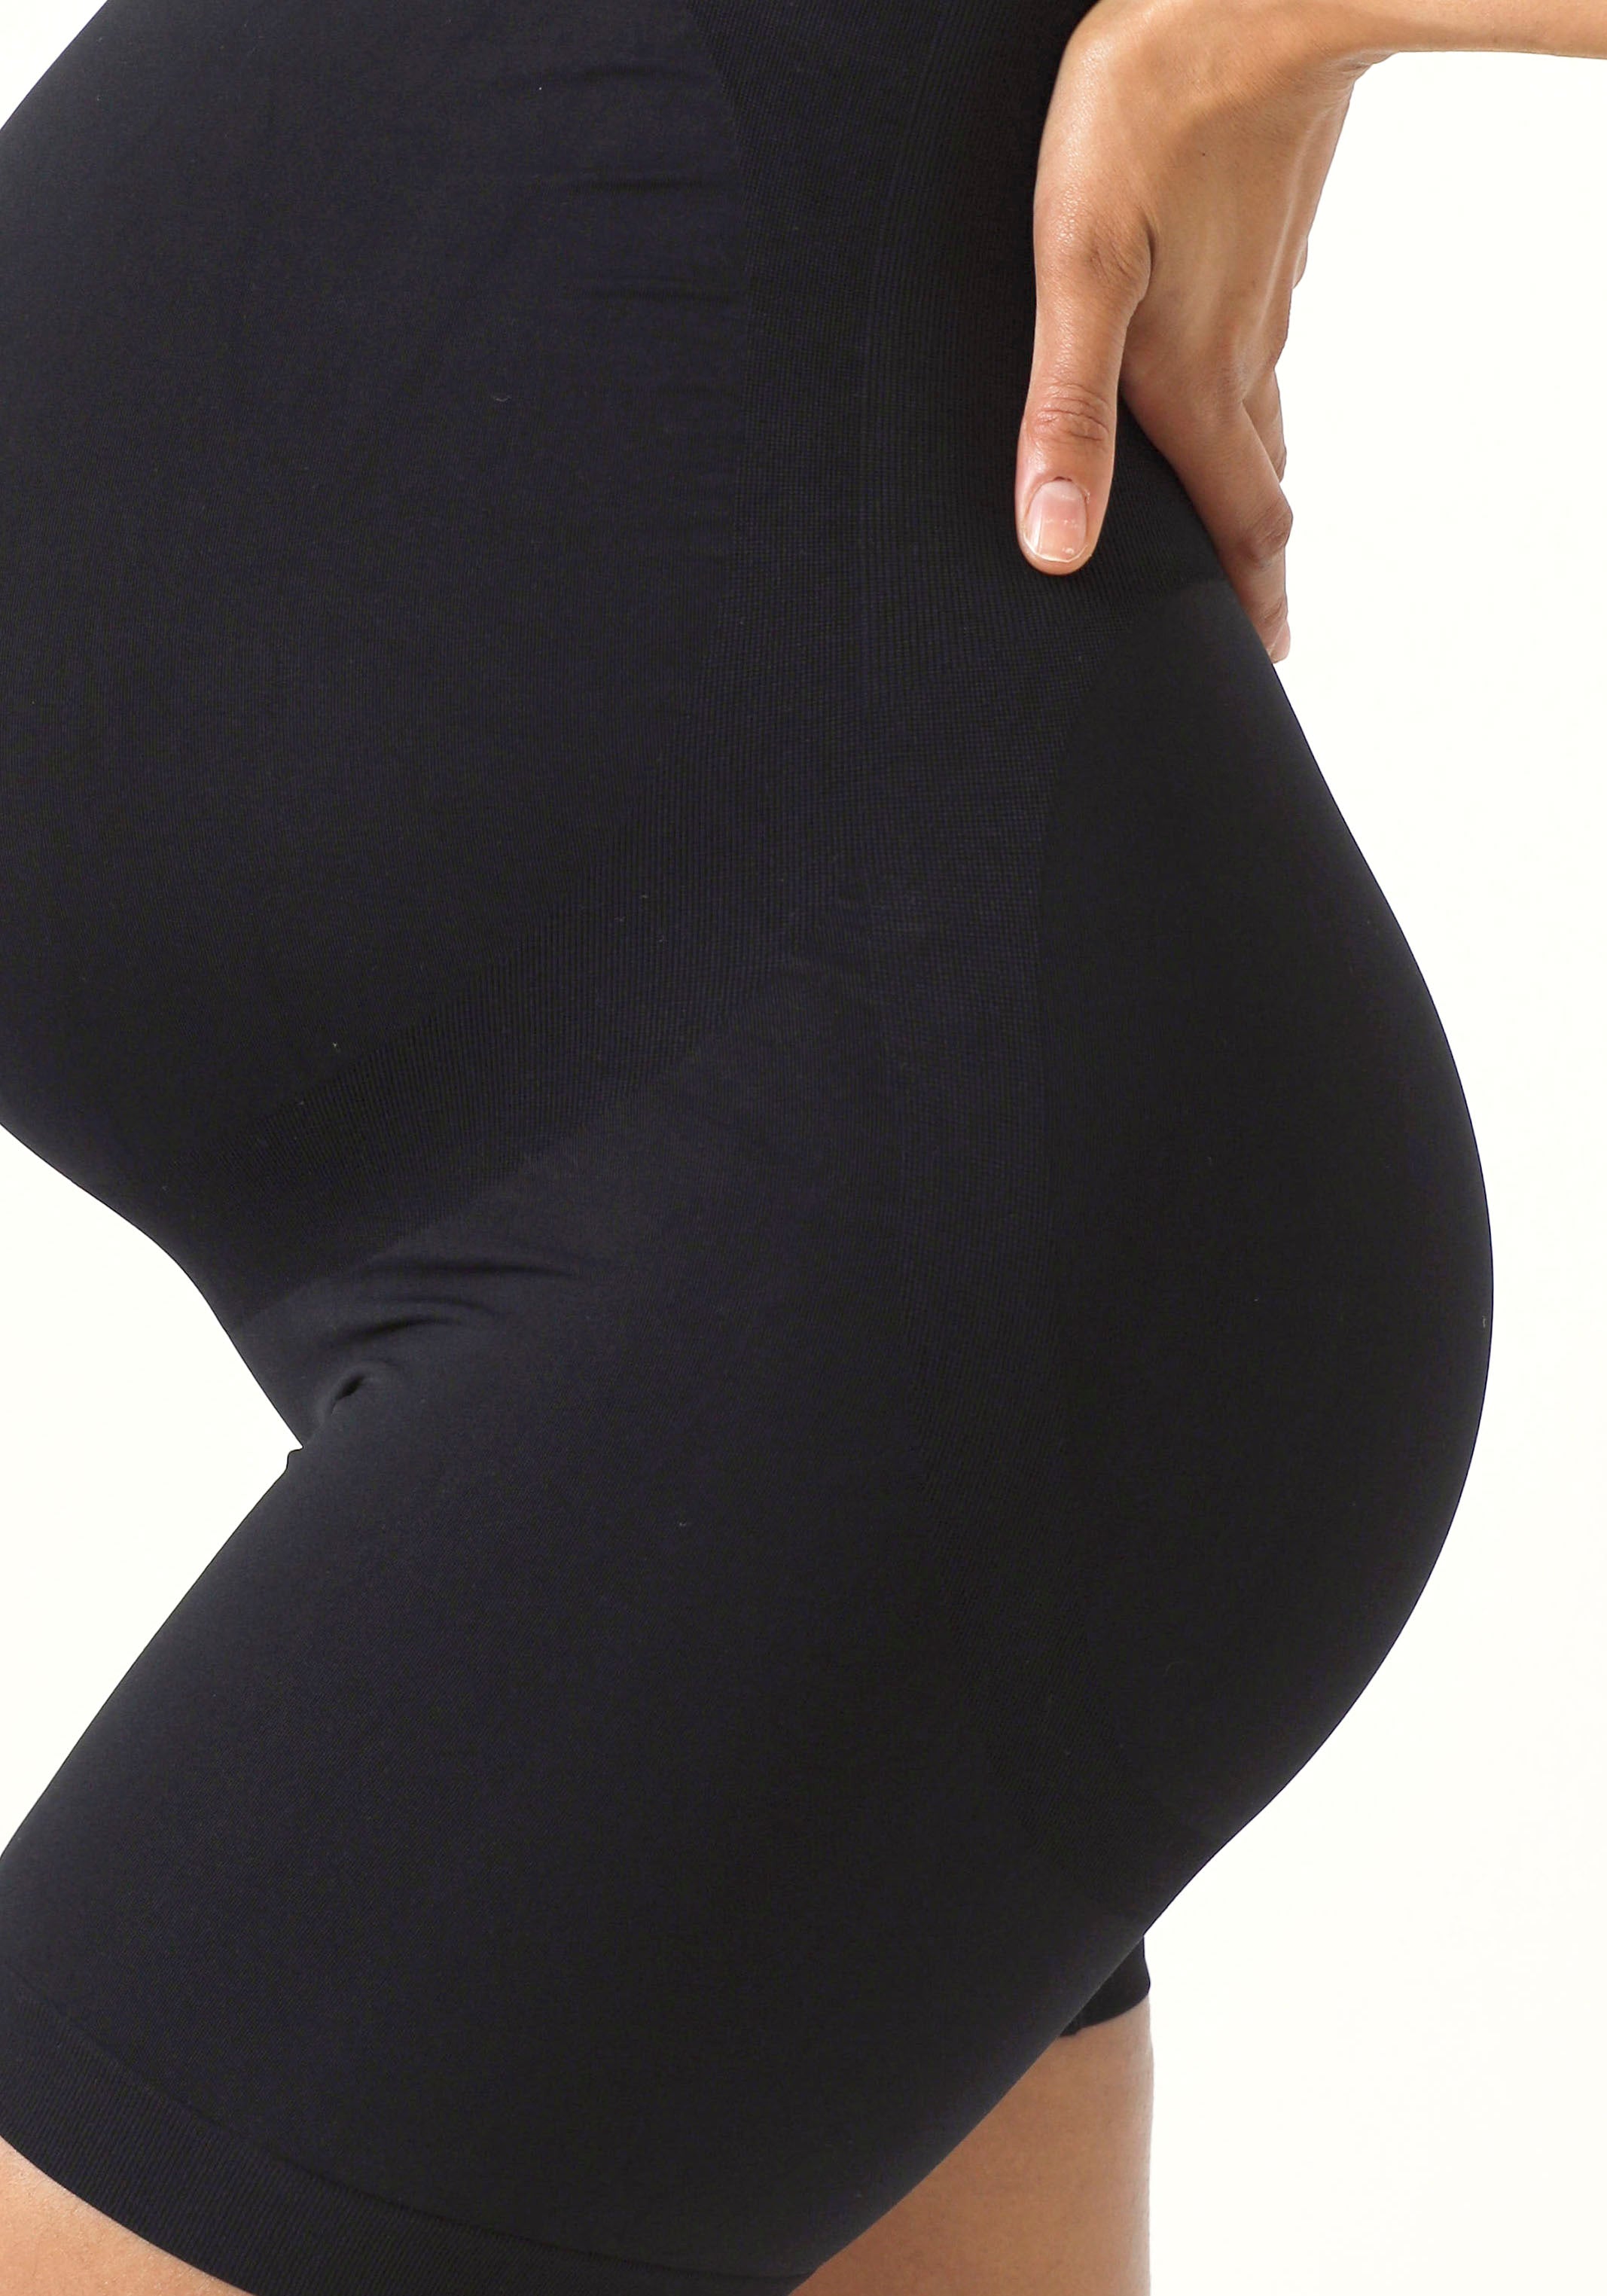 NOTHING FITS BUT Women's Classic Seamless Maternity Leggings